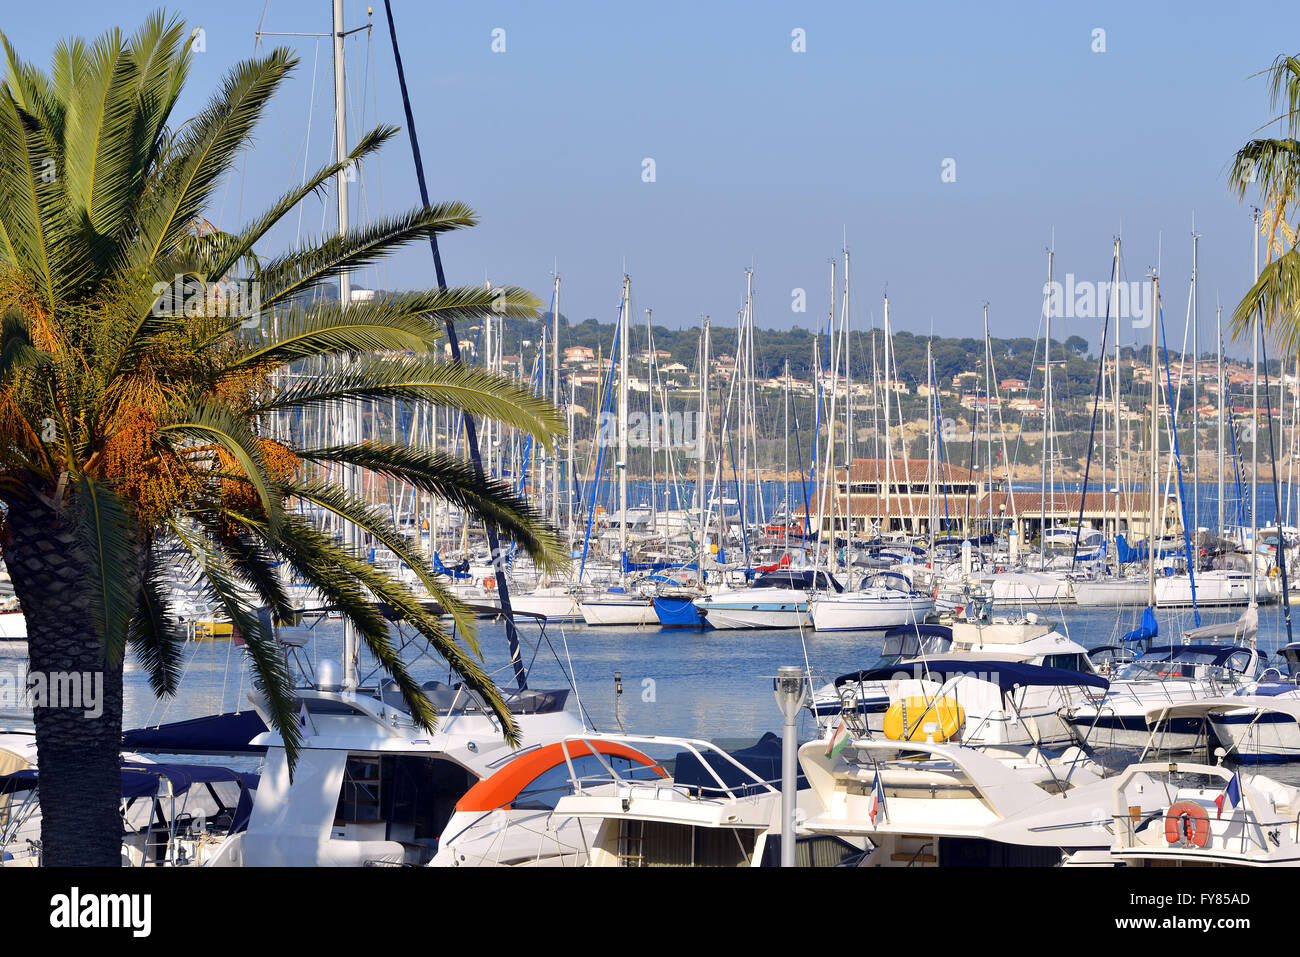 Port of Bandol and palm tree, commune in the Var department in the Provence-Alpes-Côte d'Azur region in southeastern France. Stock Photo